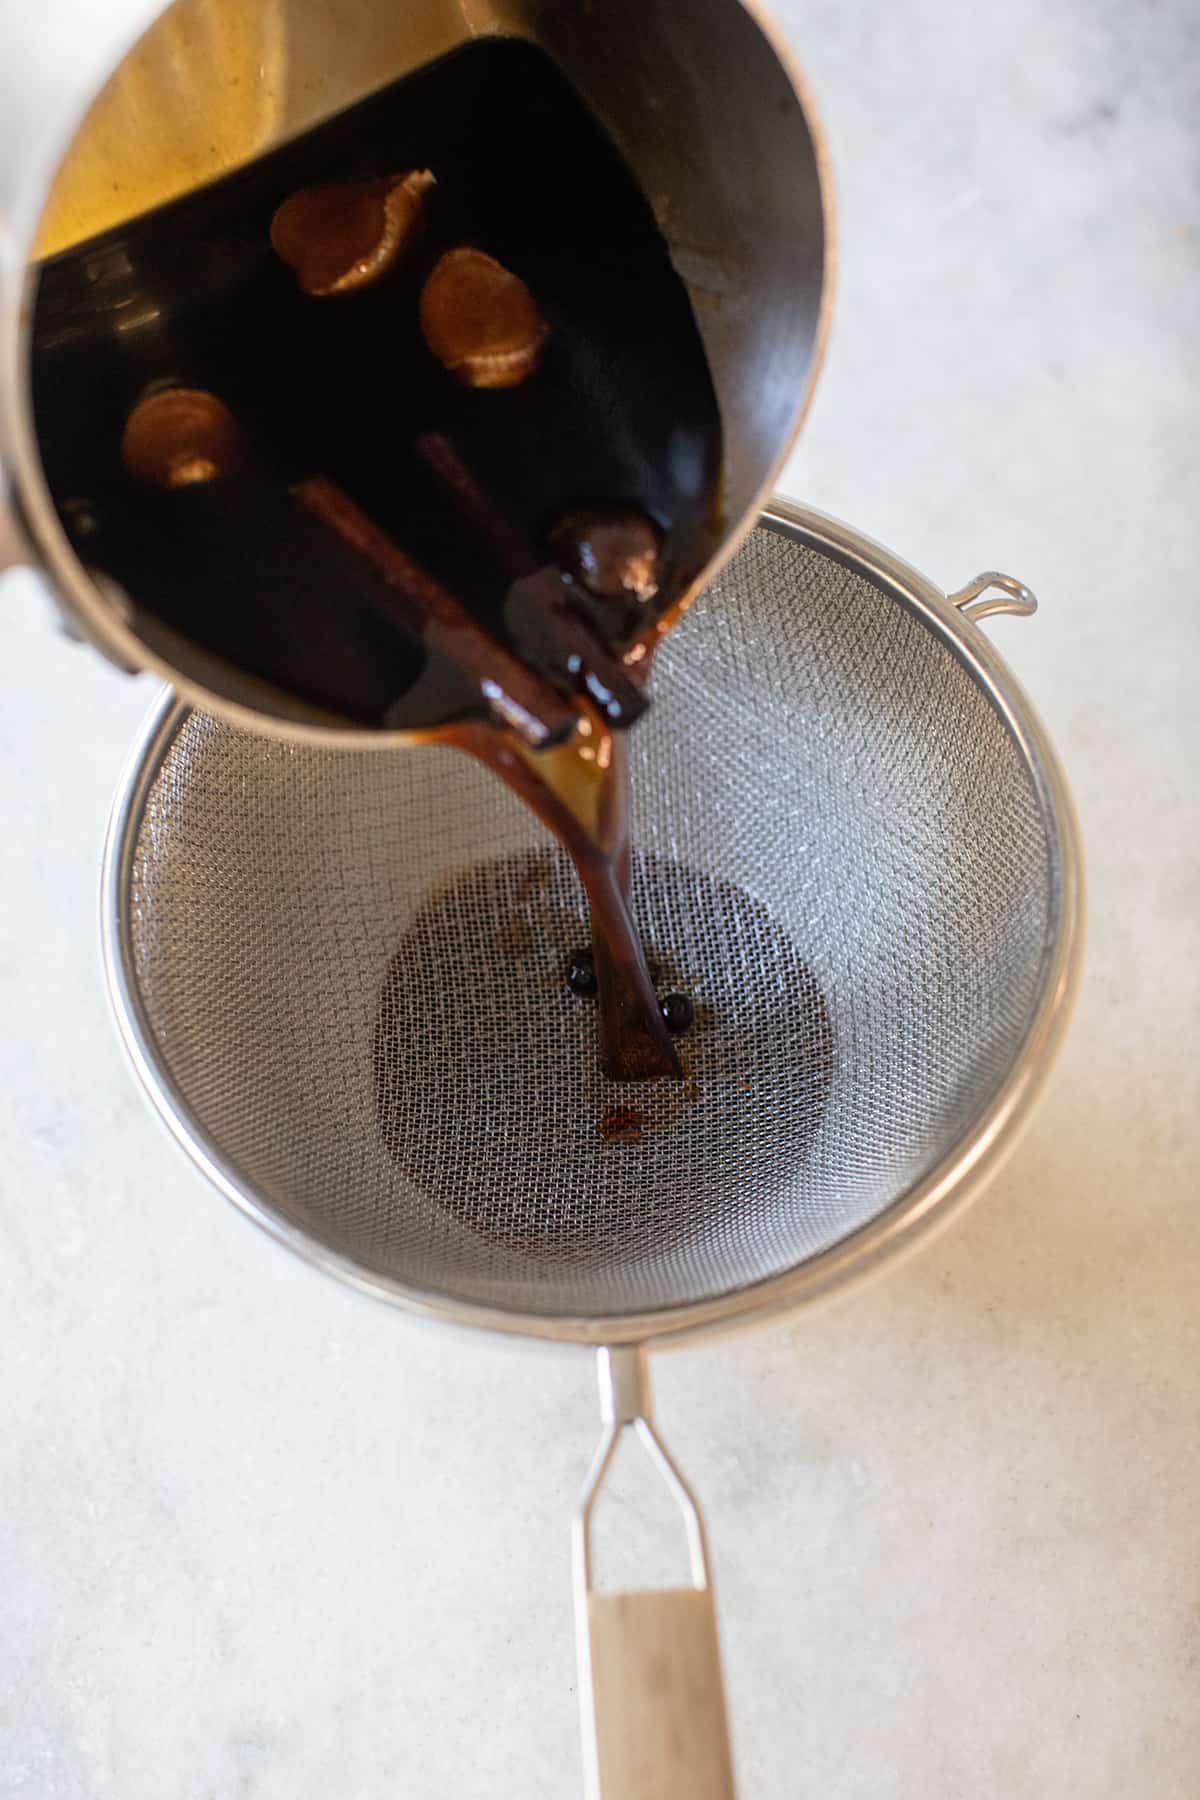 straining gingerbread syrup